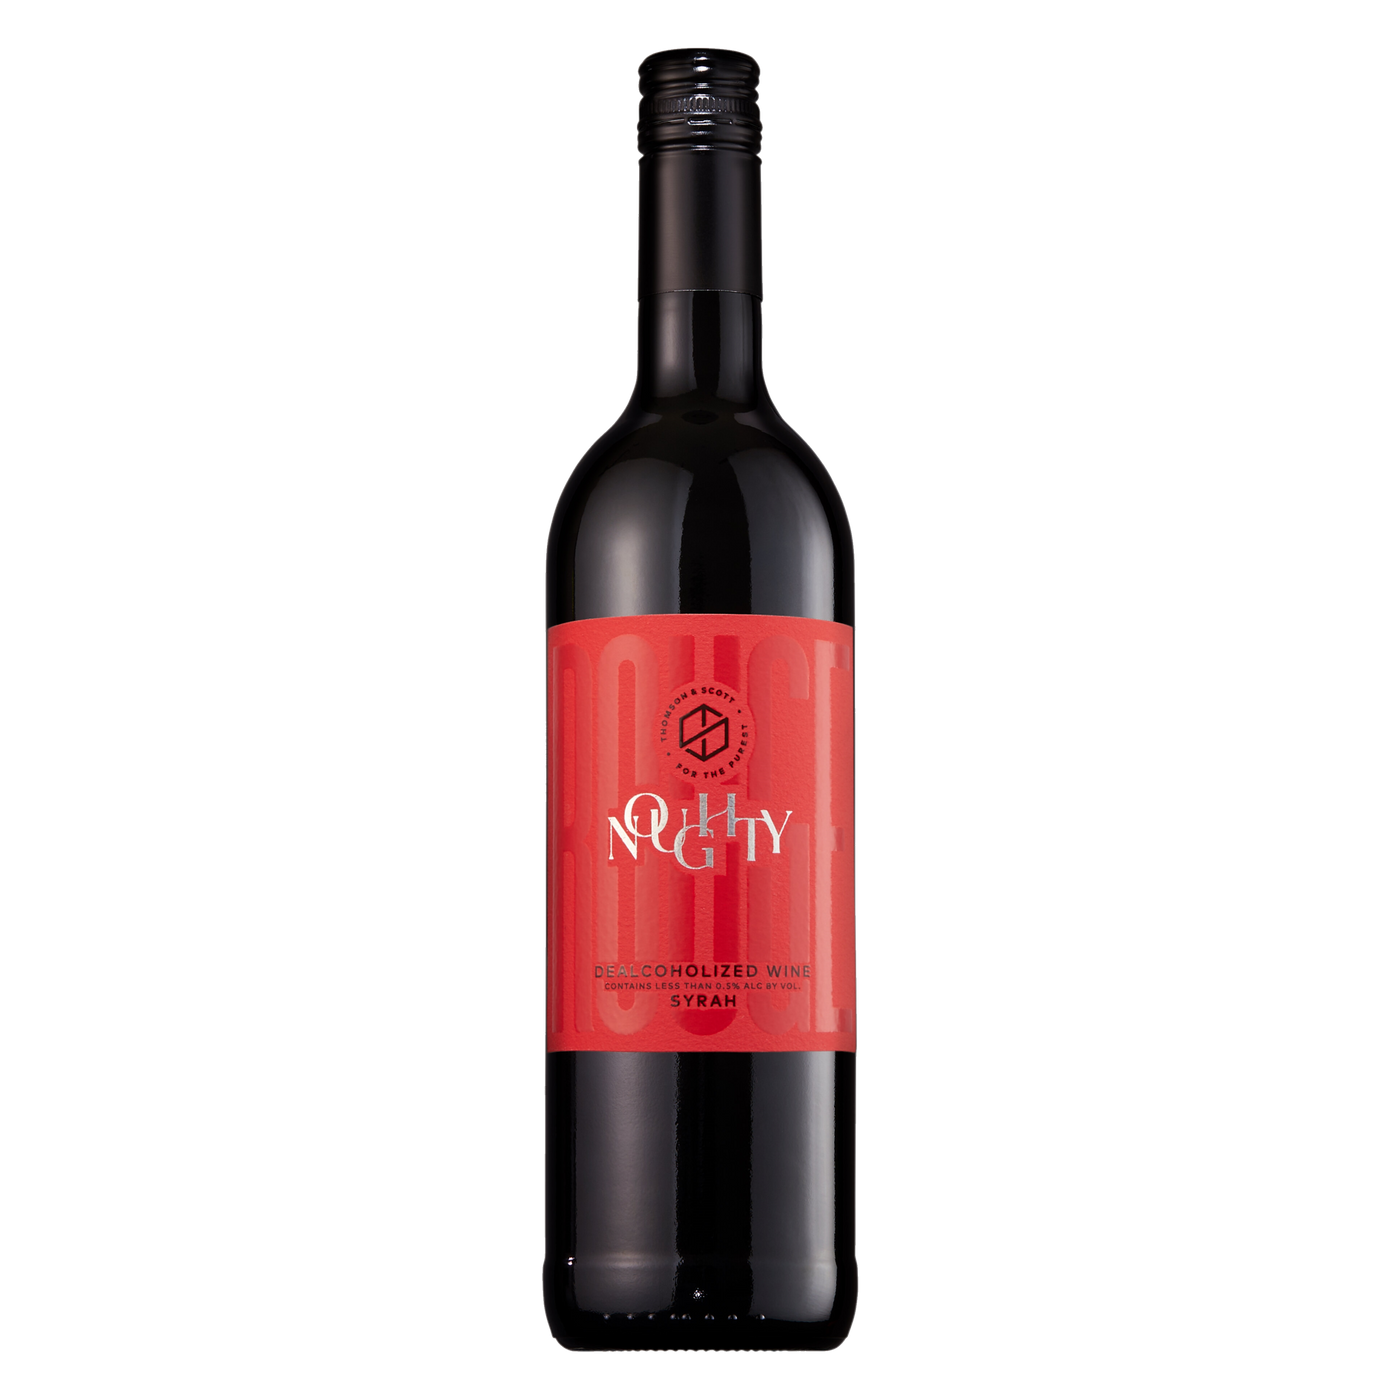 Noughty Rouge Canada - Non-Alcoholic Syrah - south africa grapes - great tasting non-alcoholic wine